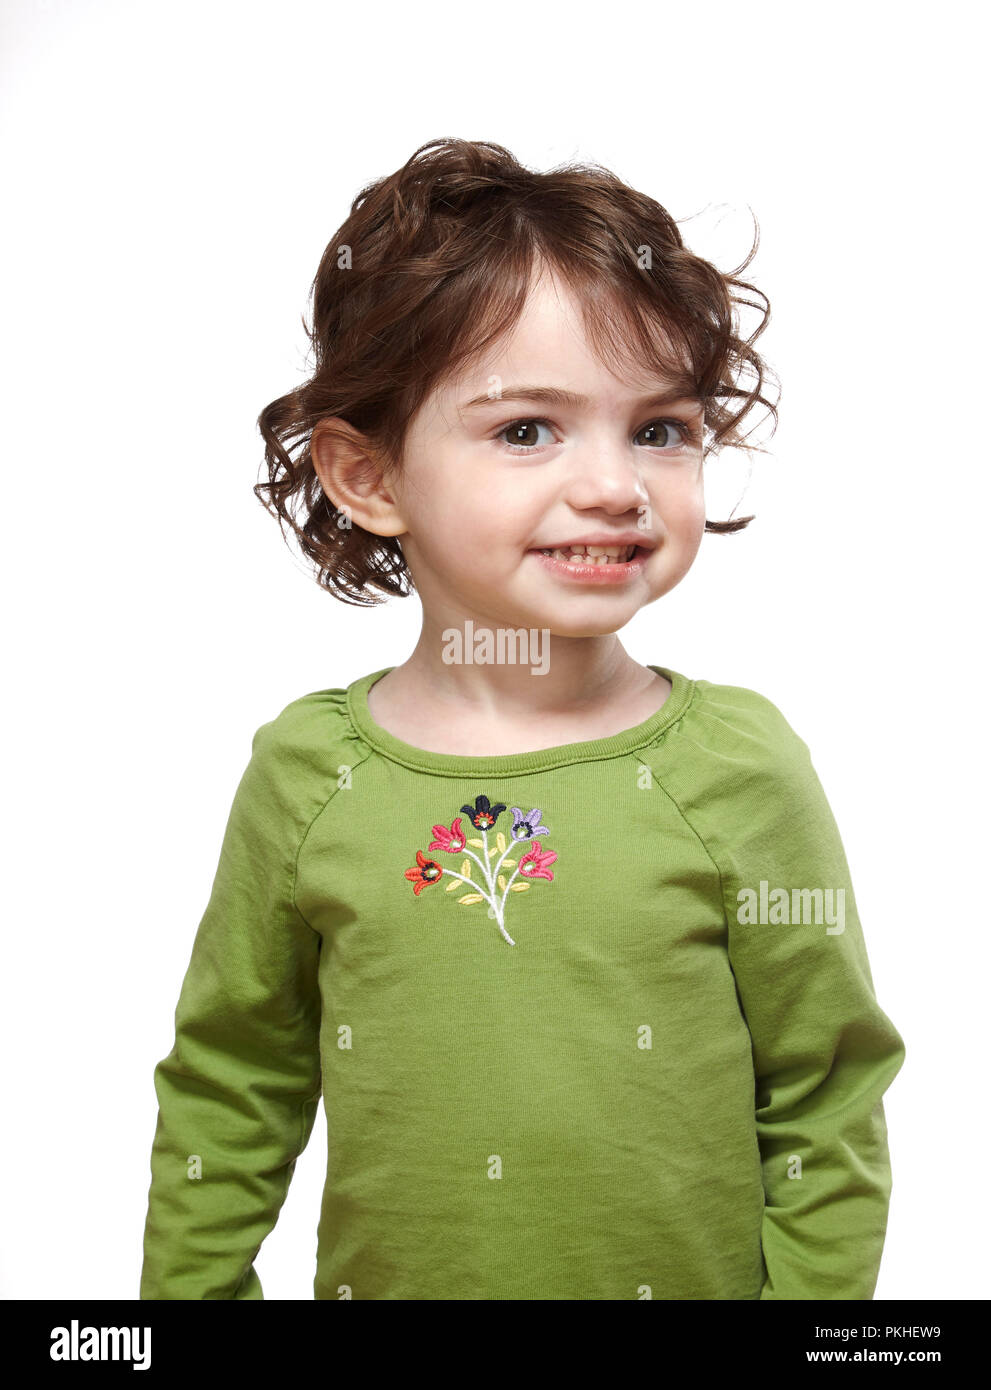 Smiling mixed race toddler girl Stock Photo by ©jbryson 21363207